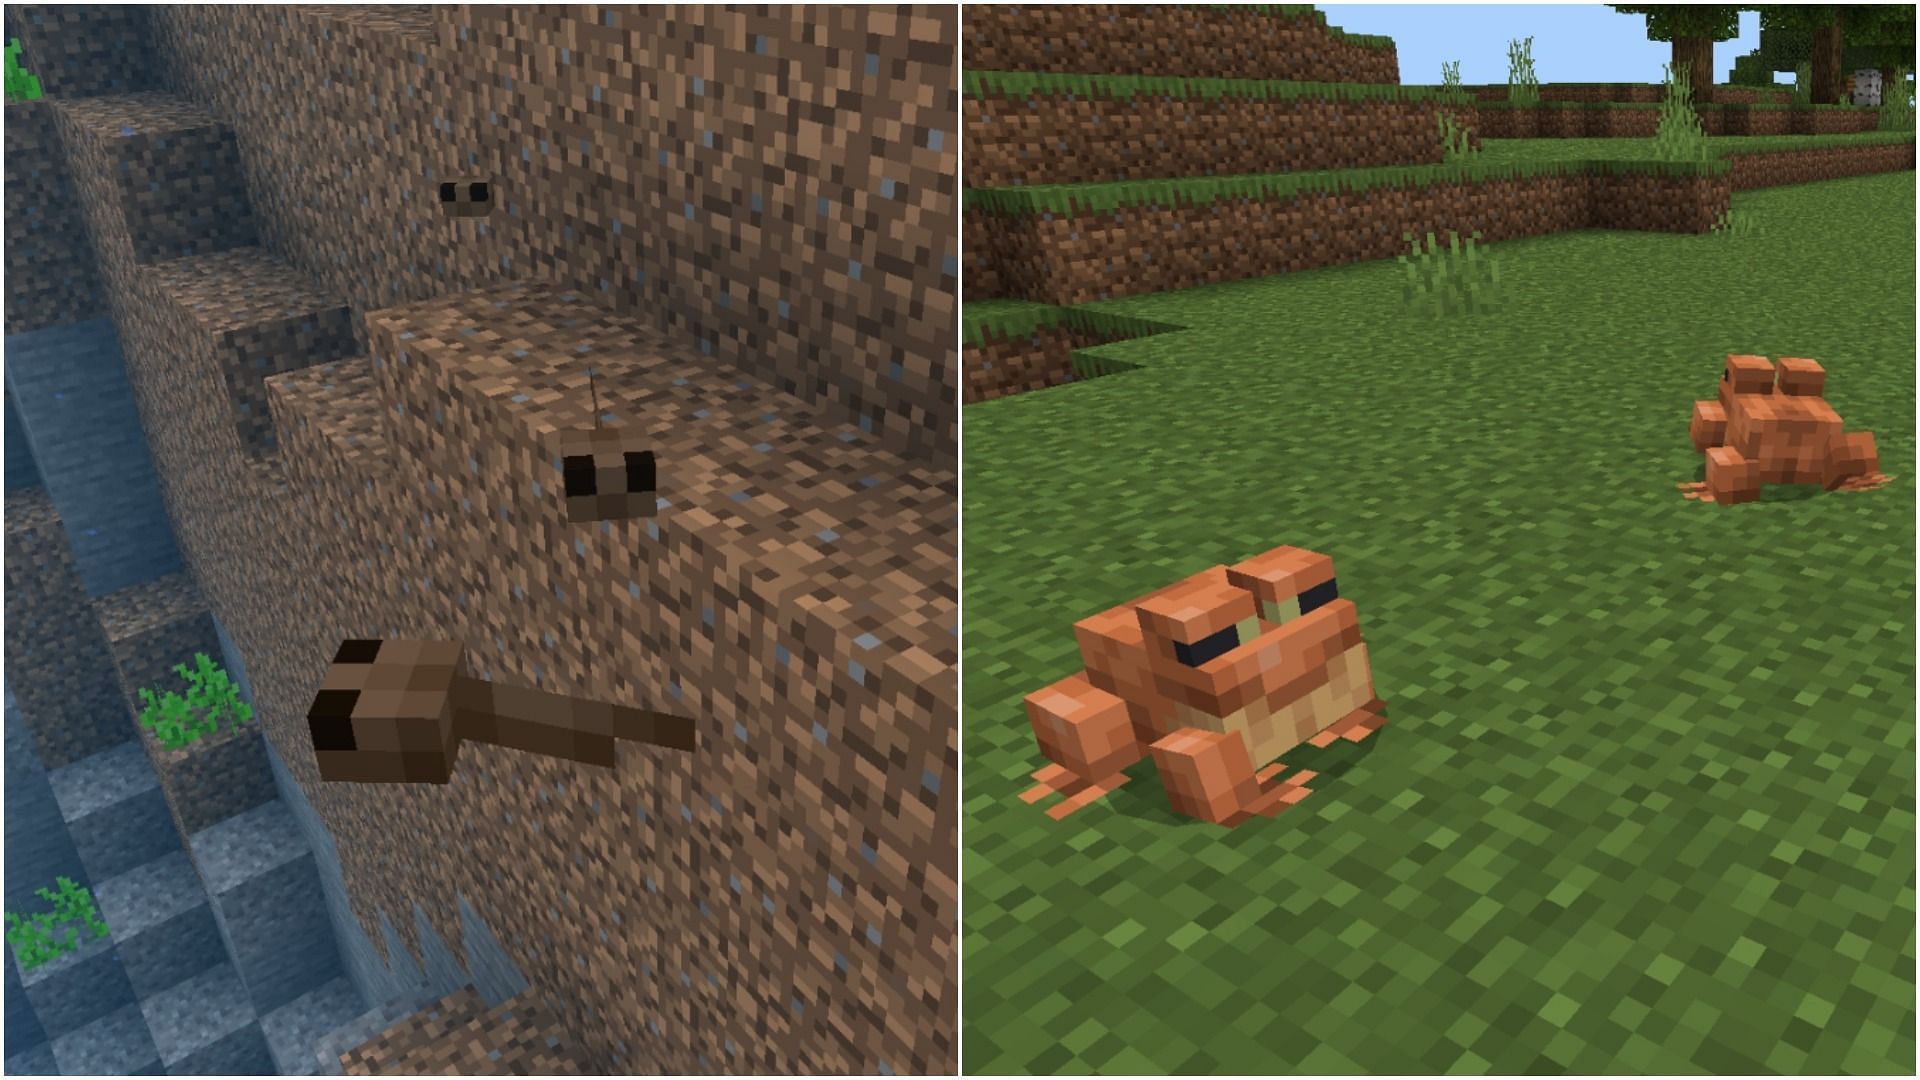 Tadpoles and frogs (Image via Minecraft)